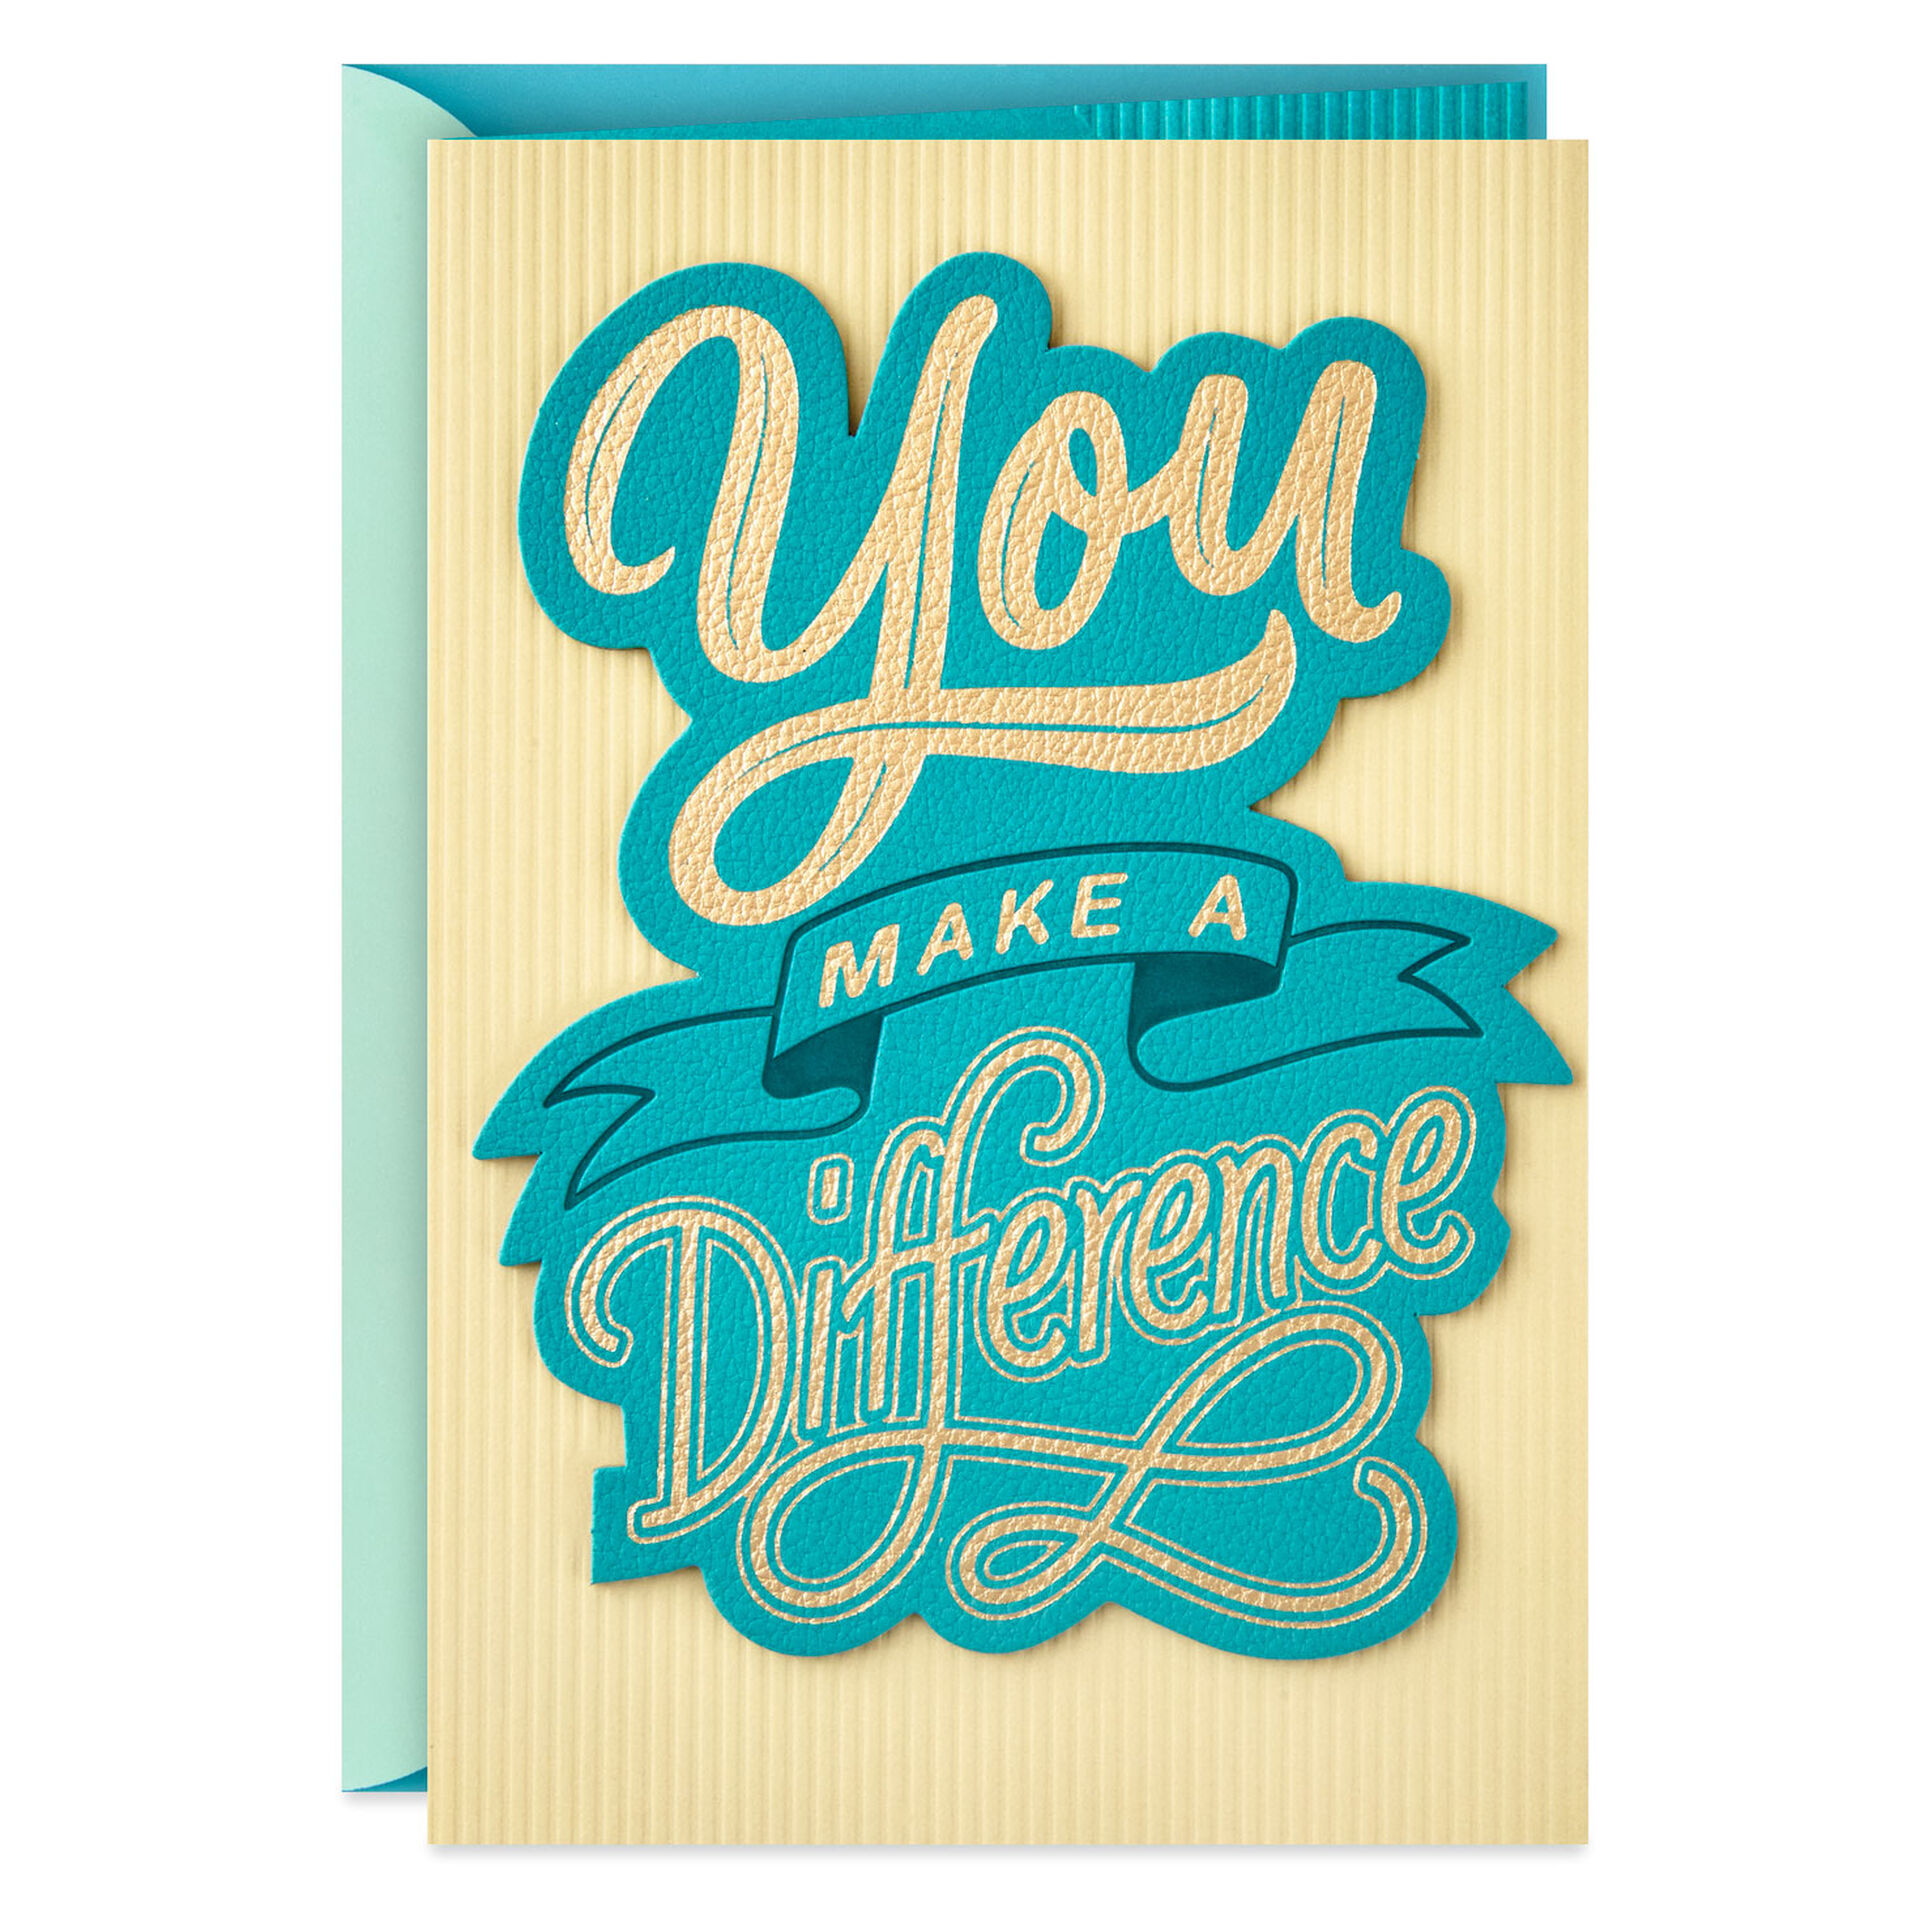 Lettering-on-Faux-Leather-with-Foil-ThankYou-Card_759T2158_01